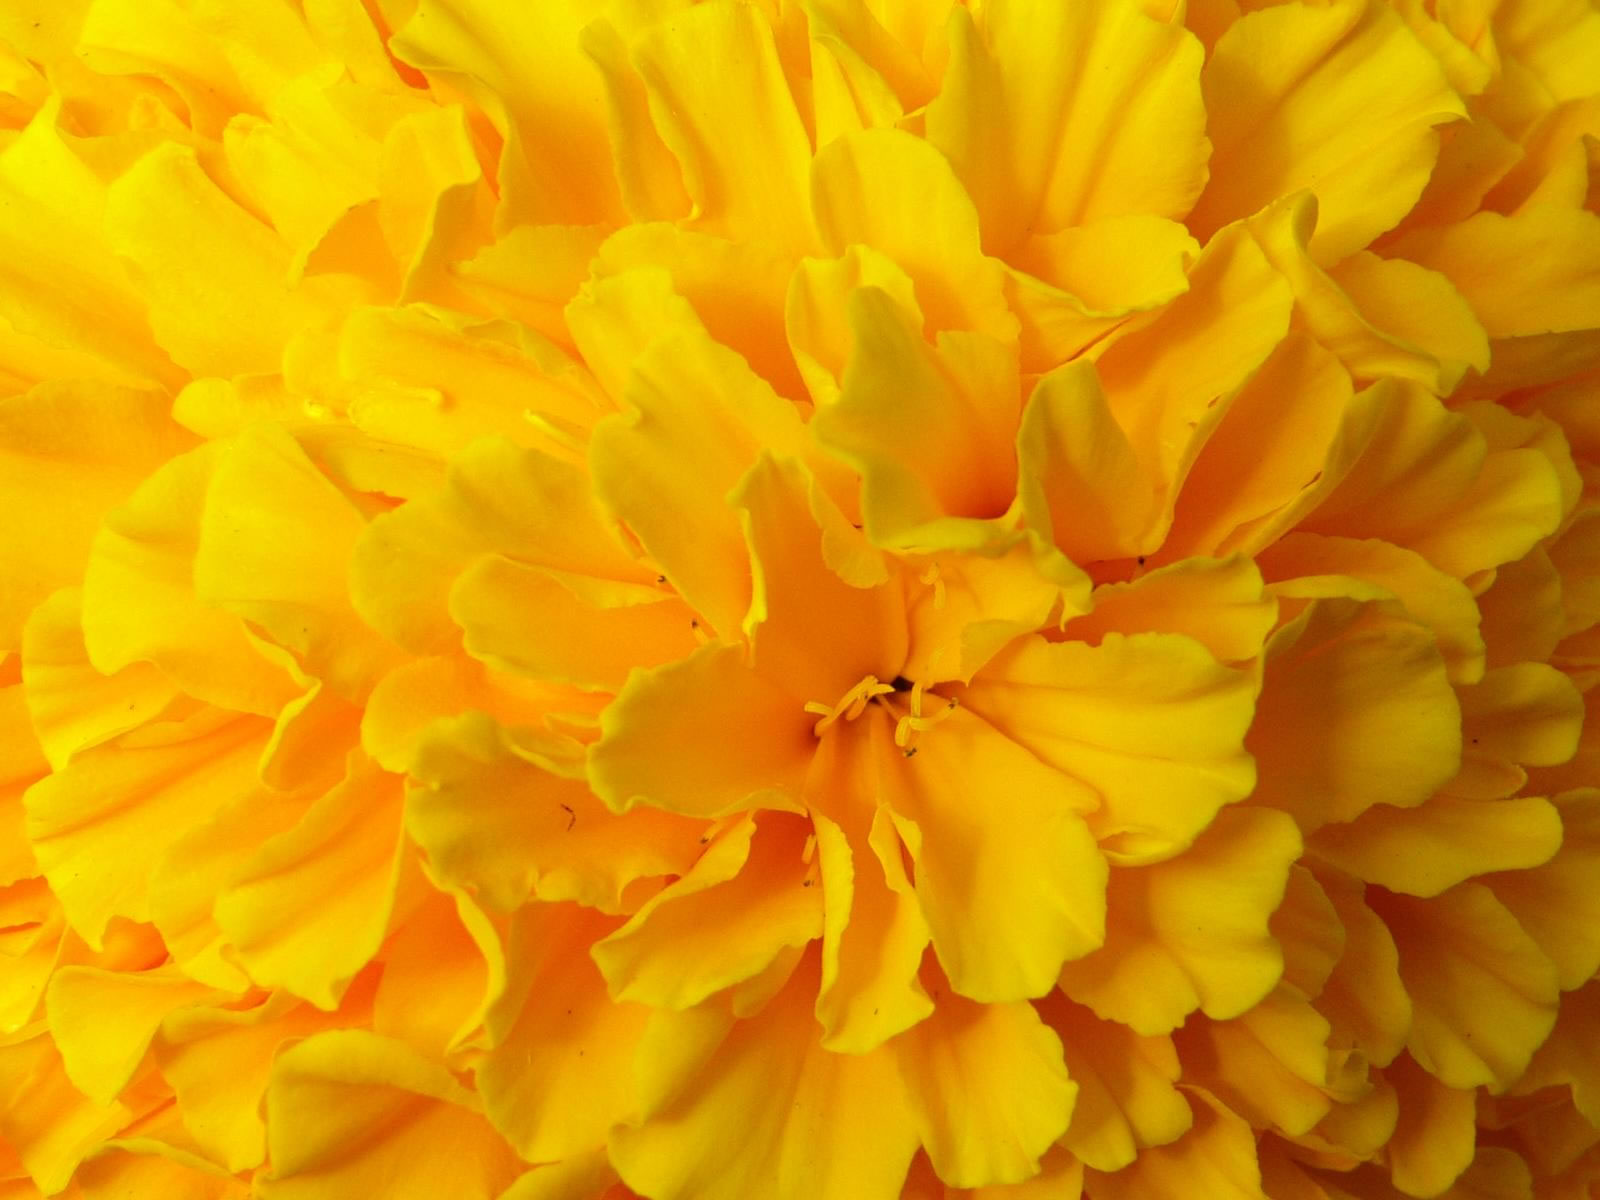 And HD Wallpaper Use This Best Gallery Of Yellow Flowers